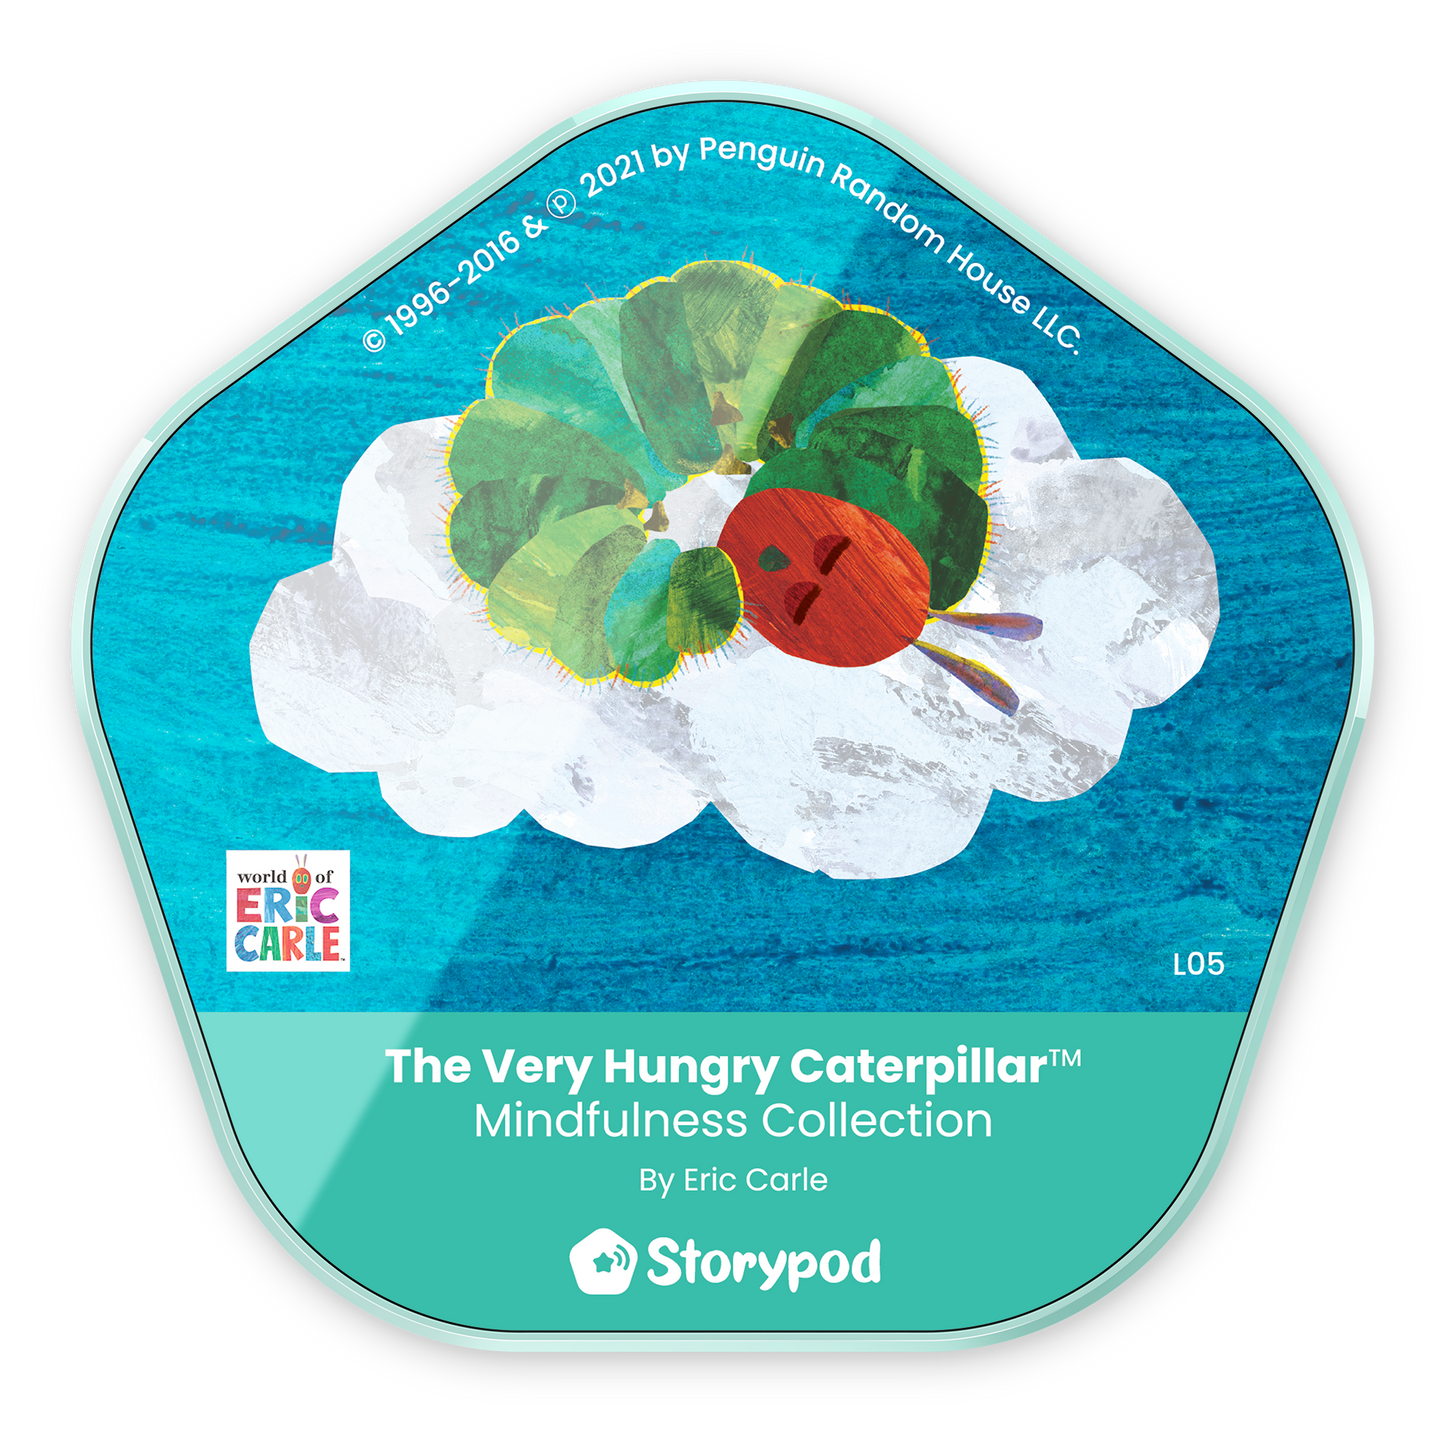 The Very Hungry Caterpillar™ Mindfulness Collection